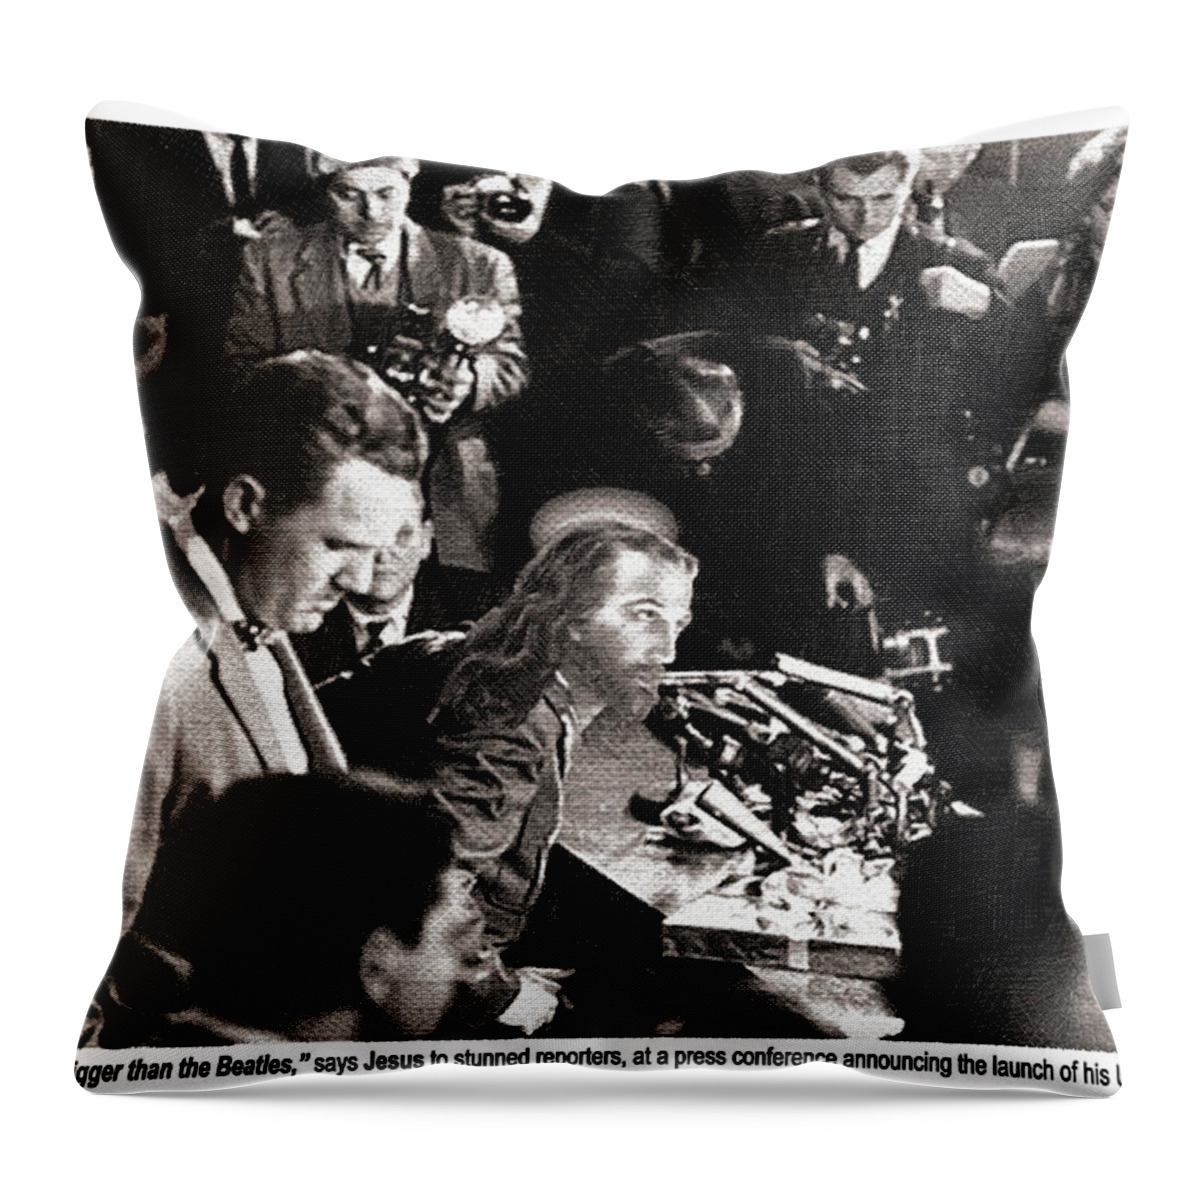 John Lennon Throw Pillow featuring the painting Jesus Press Conference 1966 by Tony Rubino